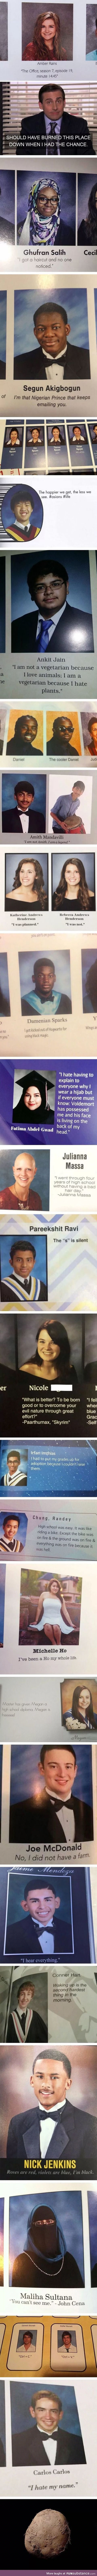 What's your yearbook quote?